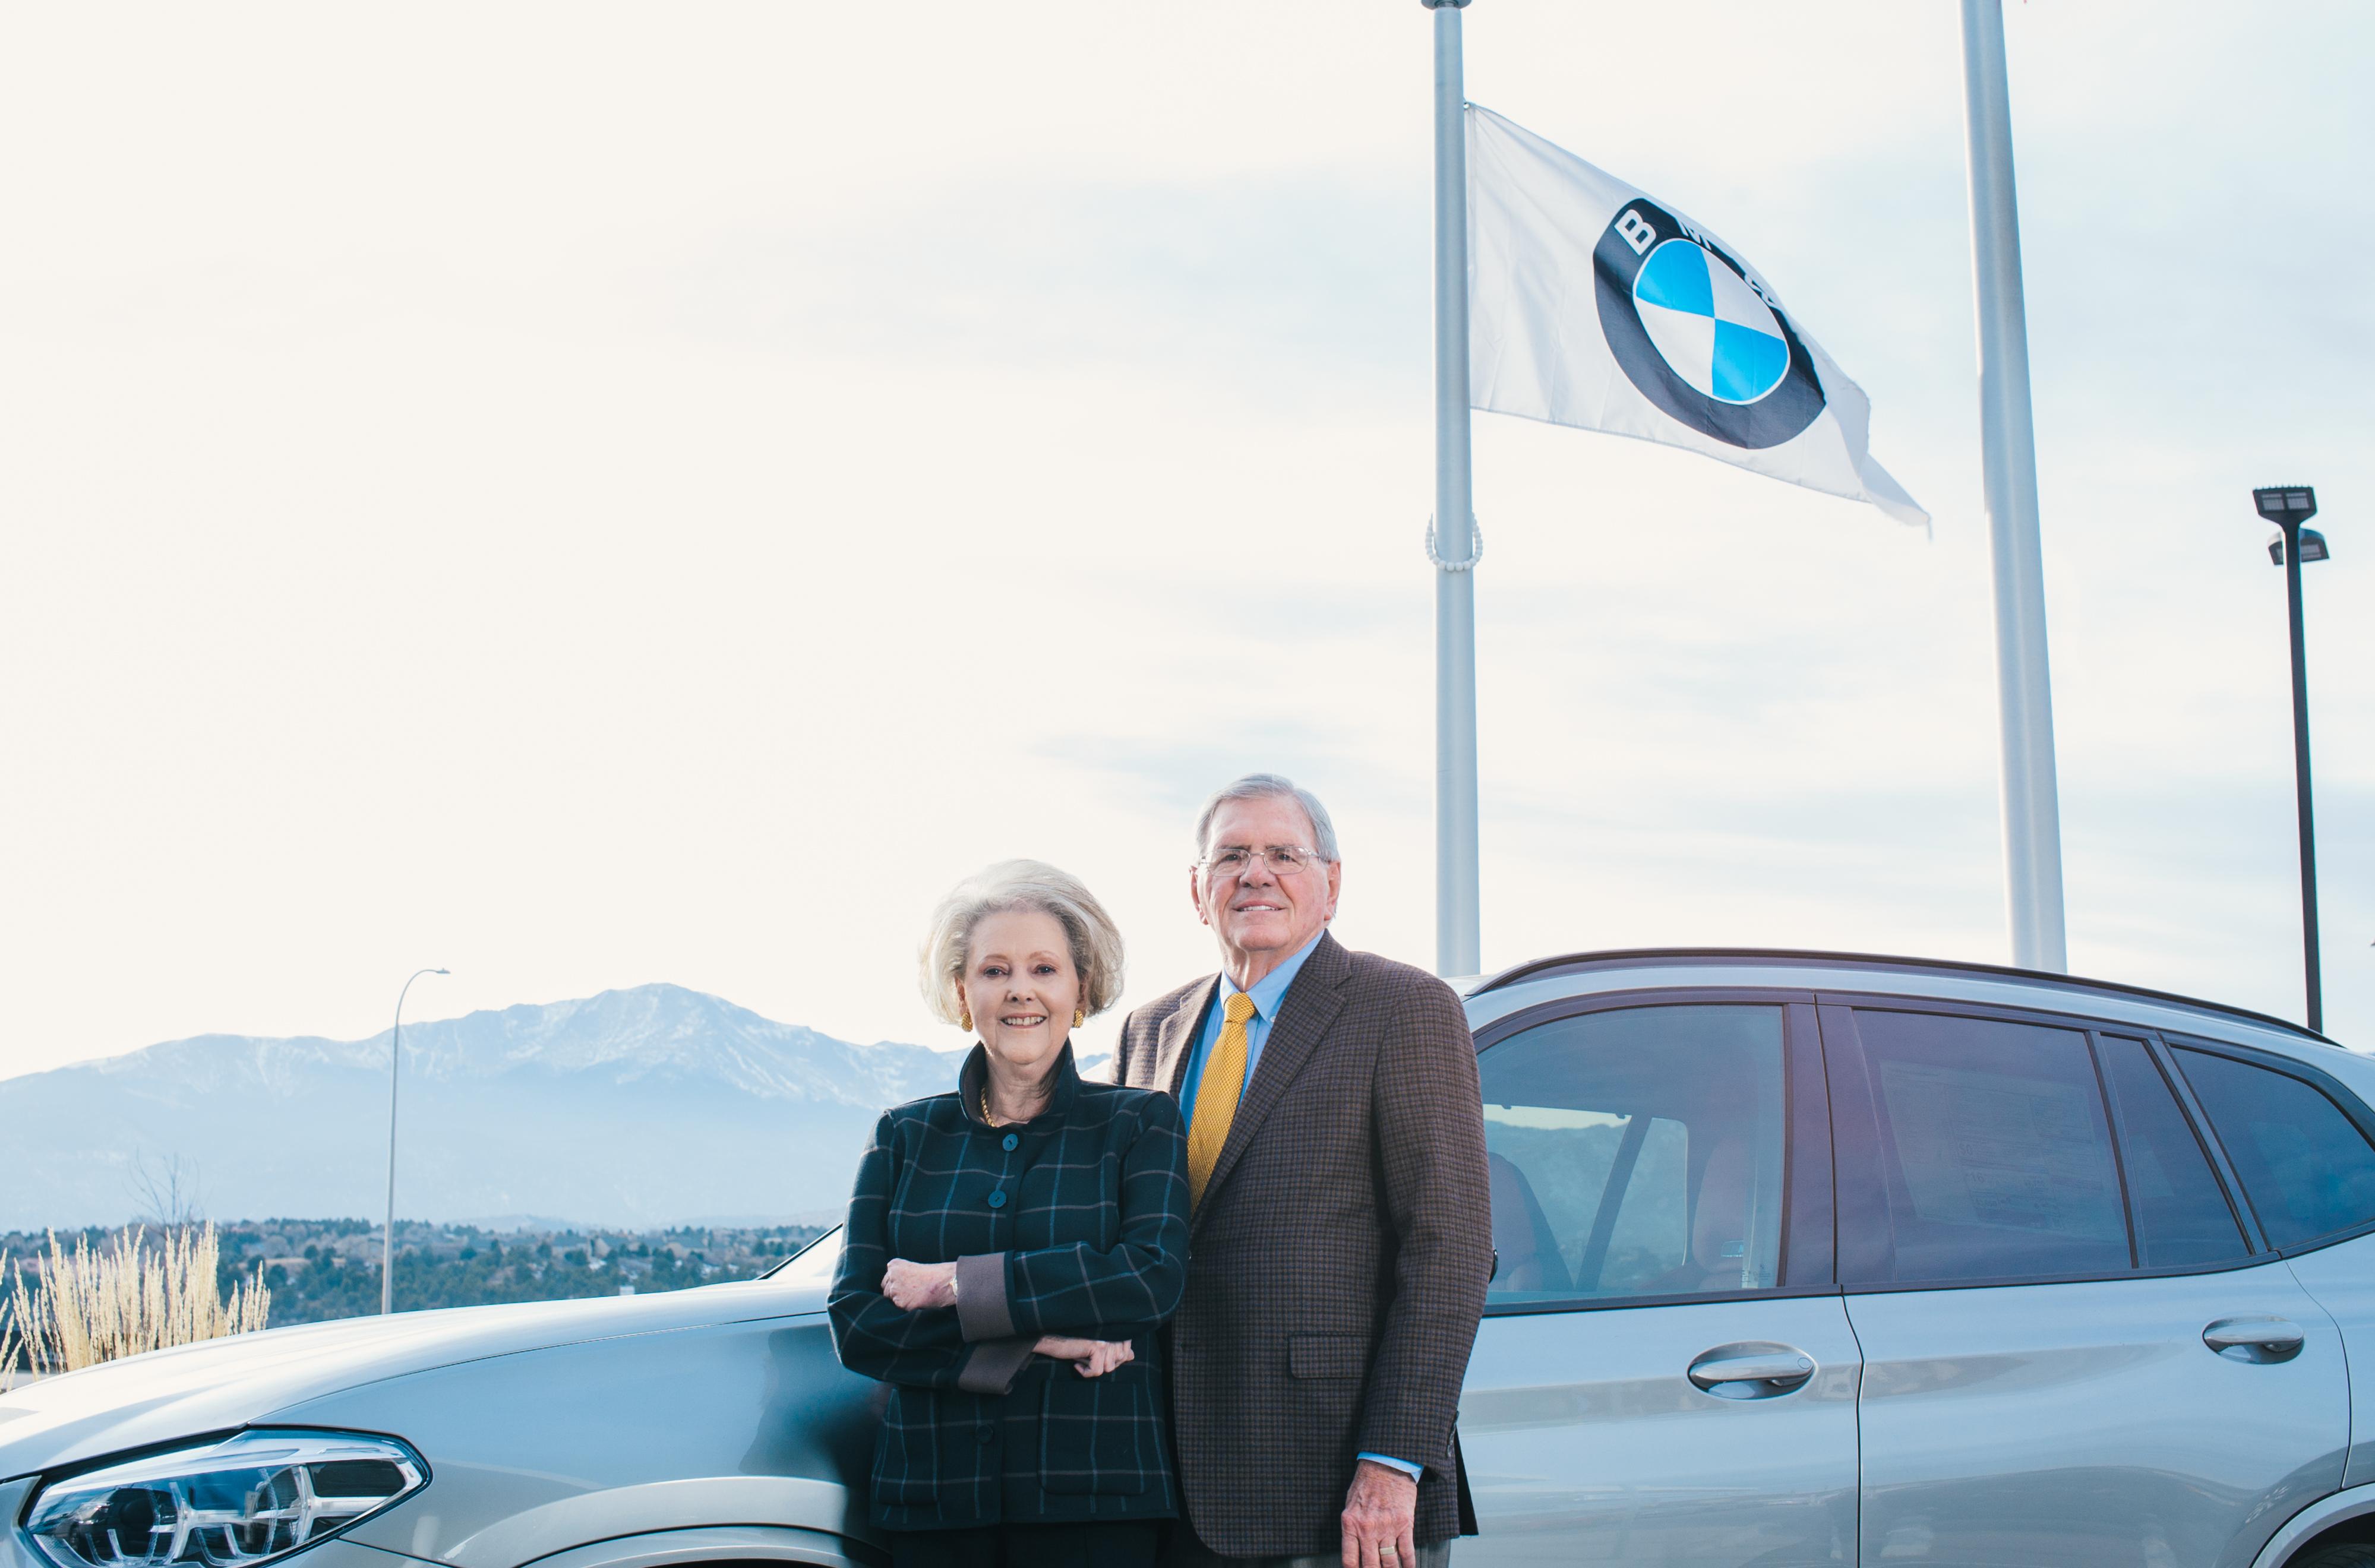 Phil and Ann Winslow standing in front of a car with a BMW flag and Pikes Peak in the background